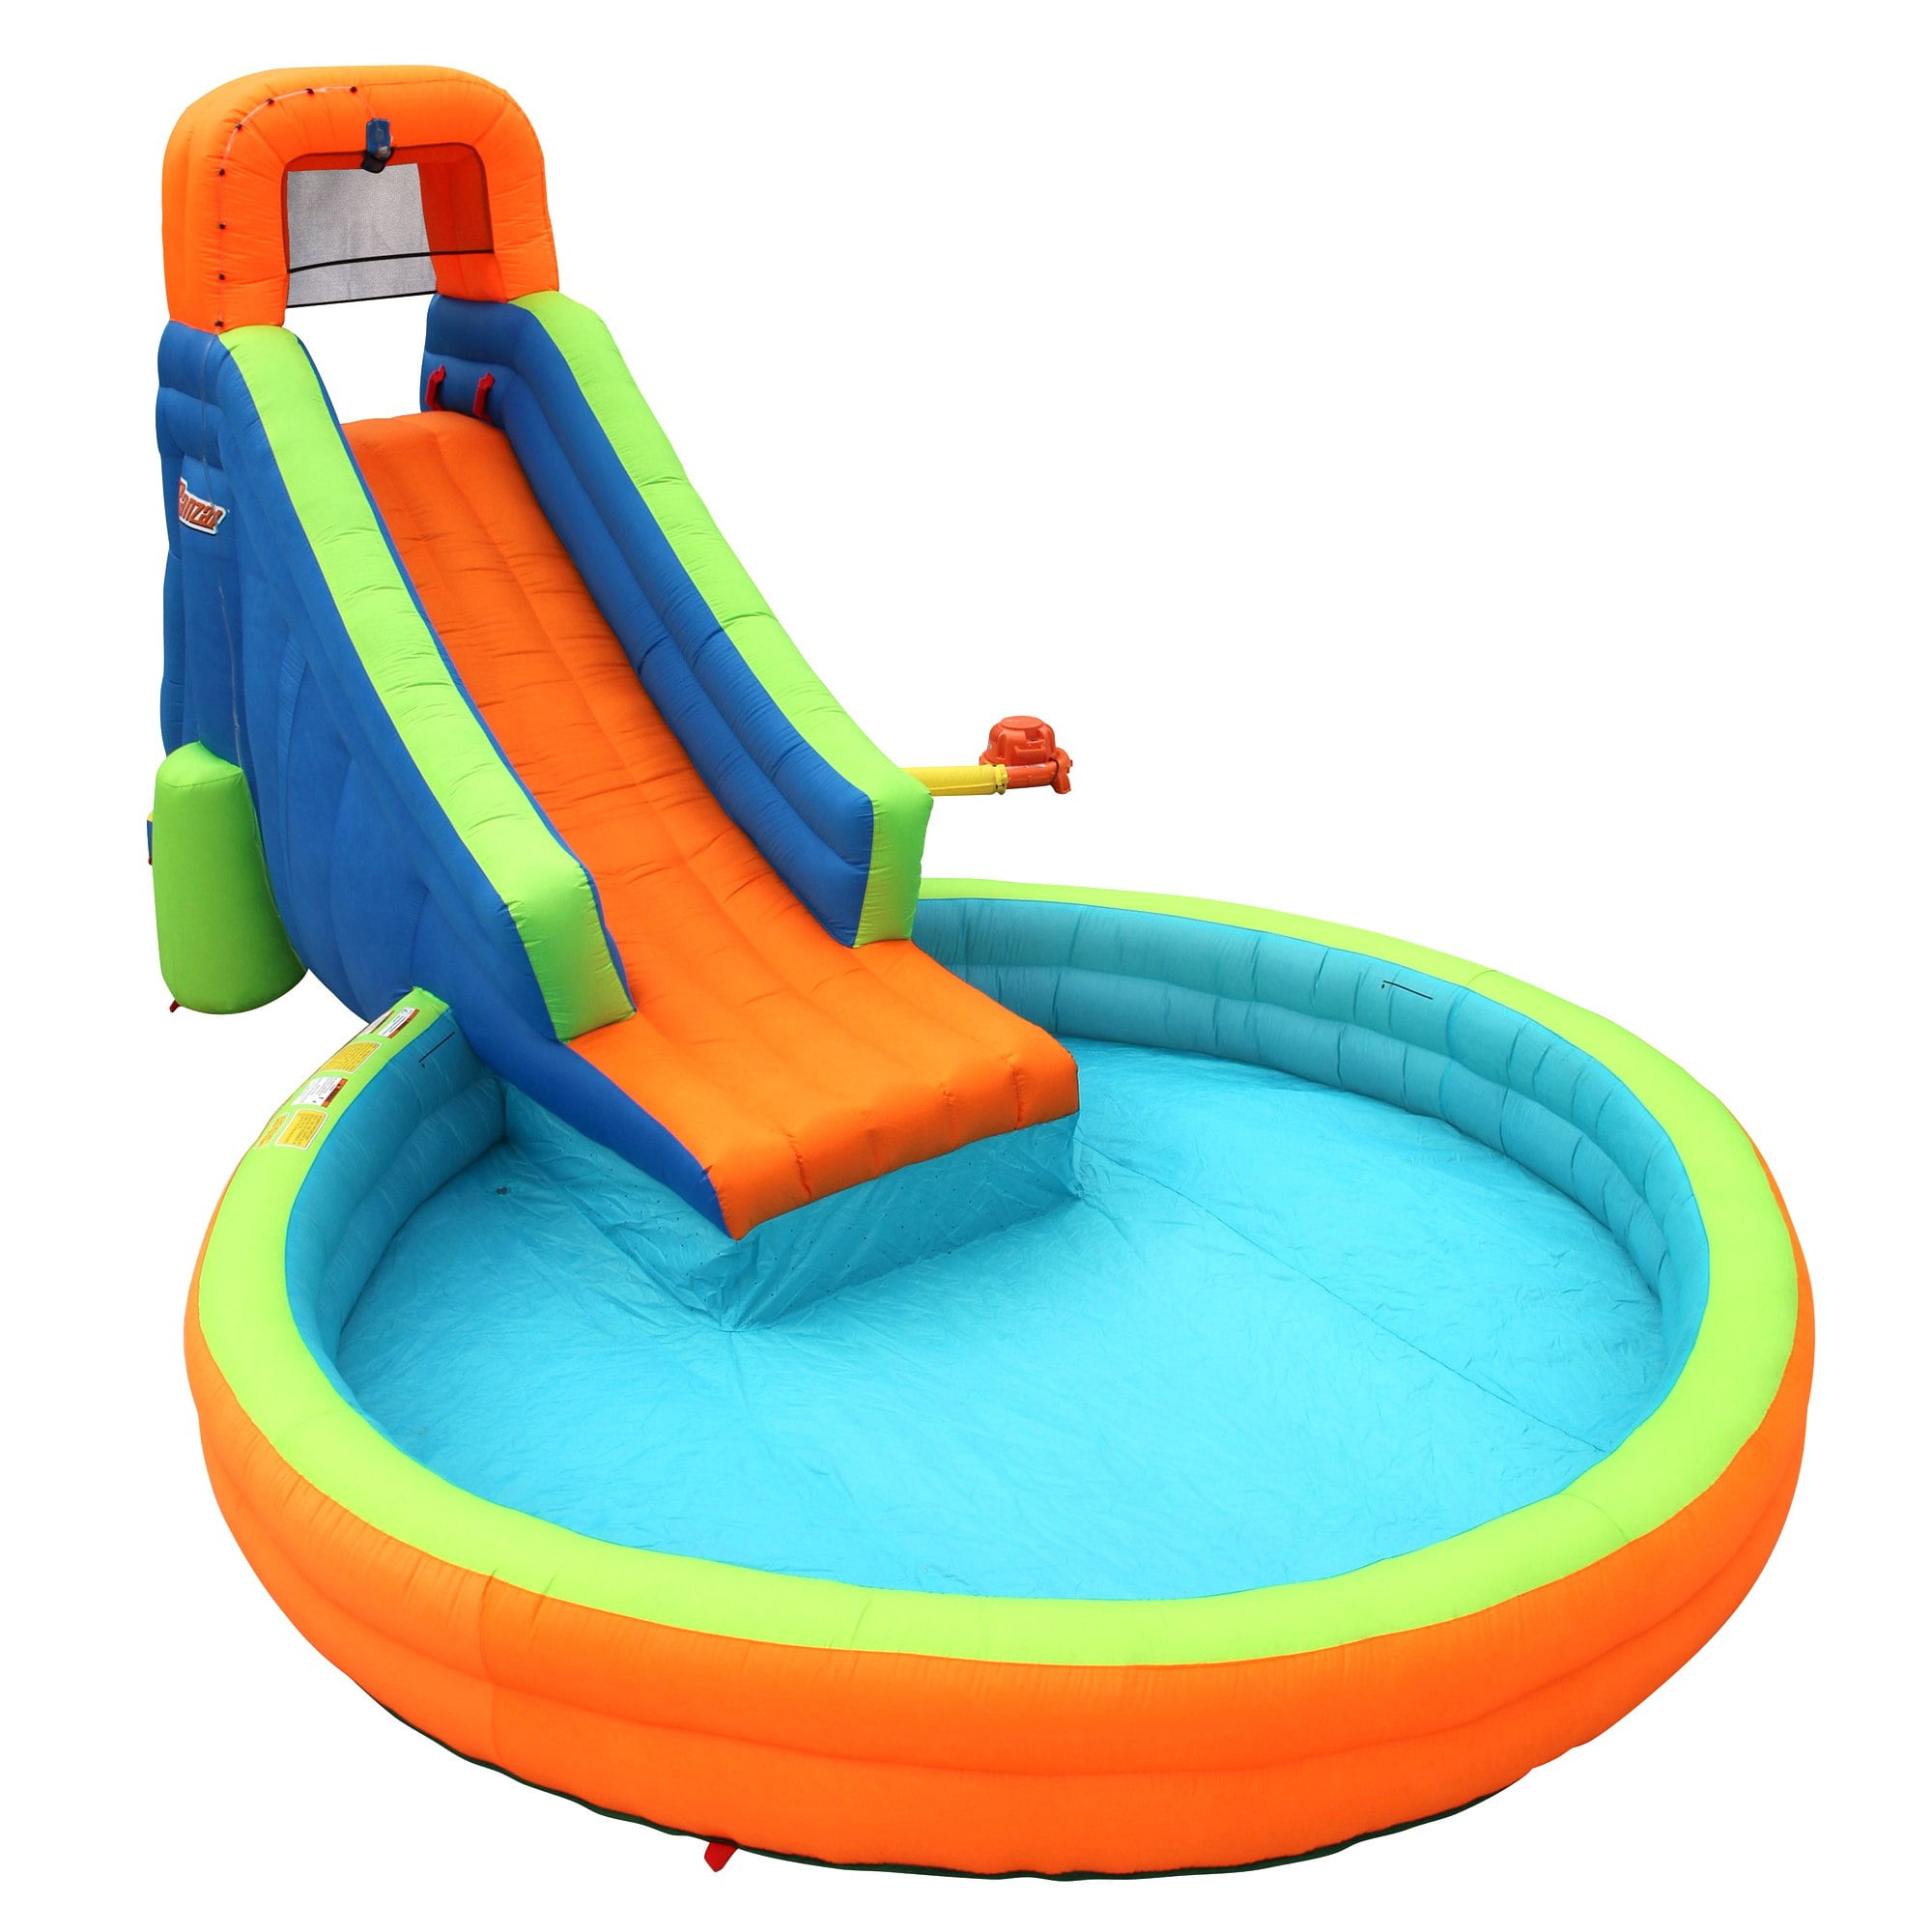 Details about   Inflatable Bouncer Castle Trampoline Obstacle Pools Slides Kids Party Play Area 